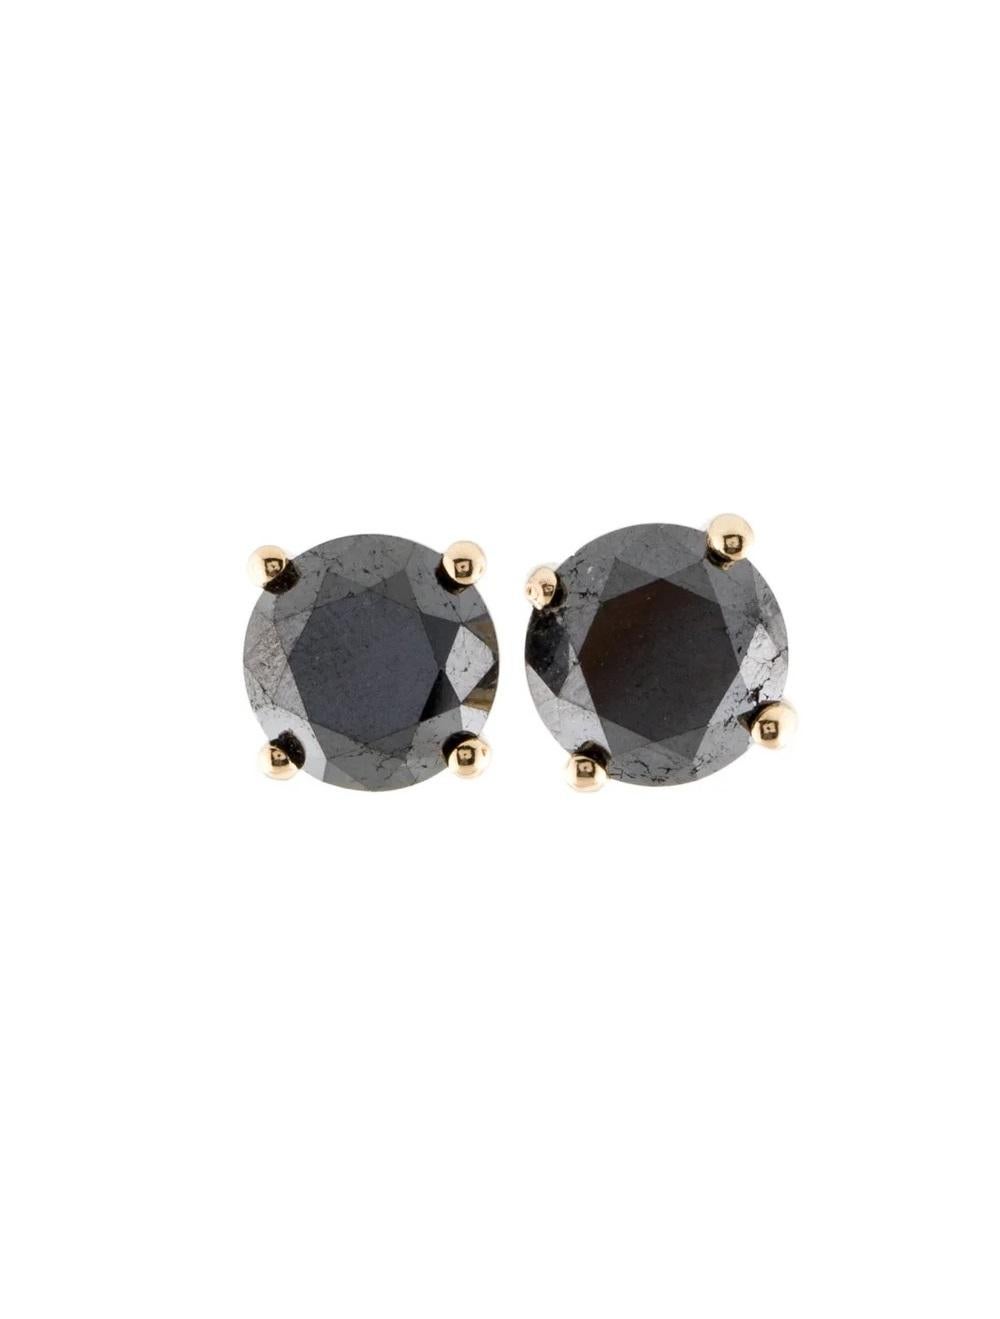 14K Yellow Gold 8.90ctw Diamond Stud Earrings - Classic Brilliance, Timeless  In New Condition For Sale In Holtsville, NY